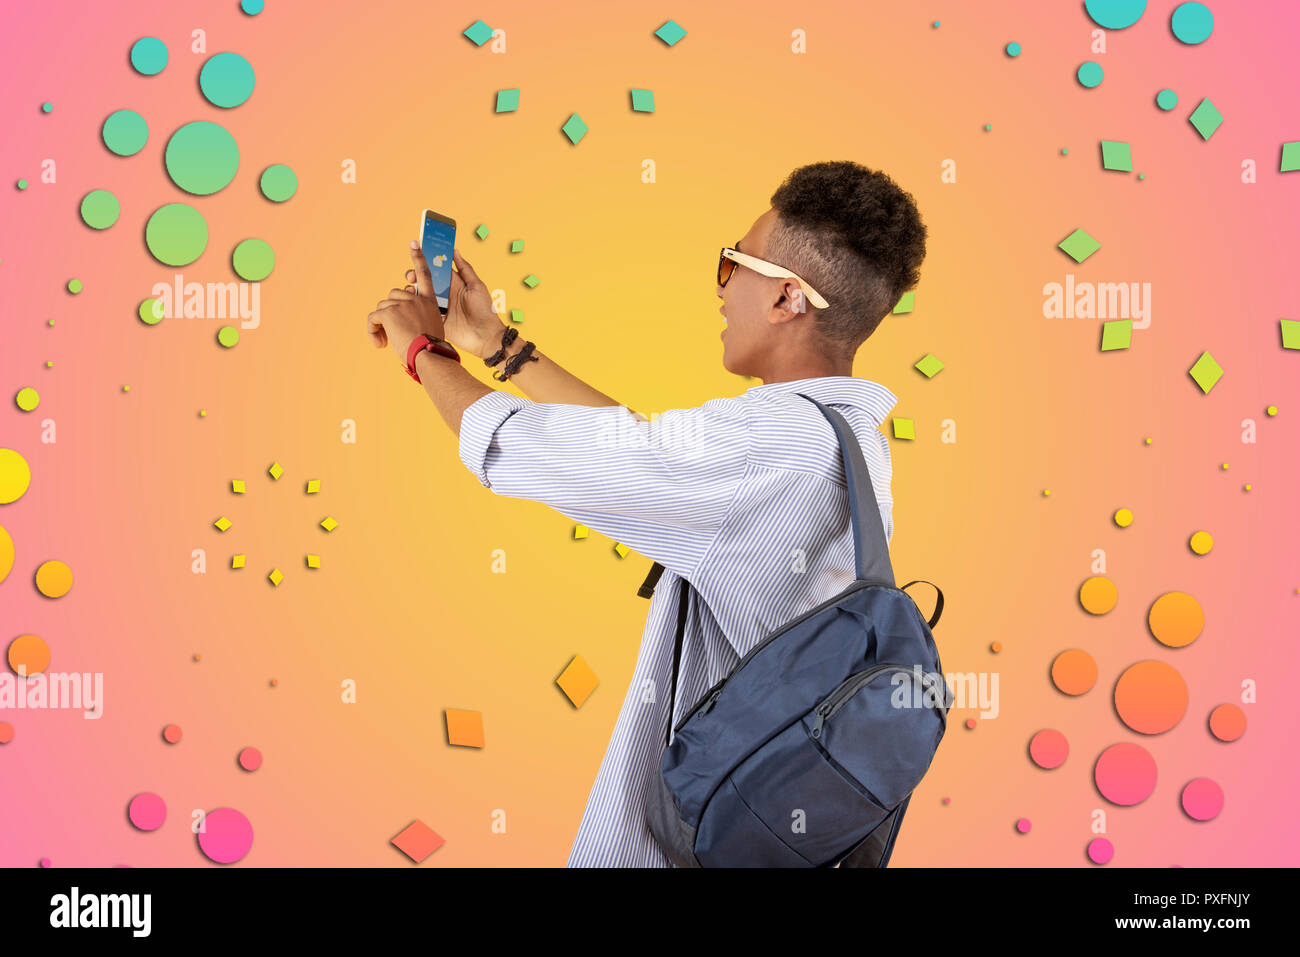 Mulatto teenager wearing blue backpack using his phone checking weather forecast Stock Photo